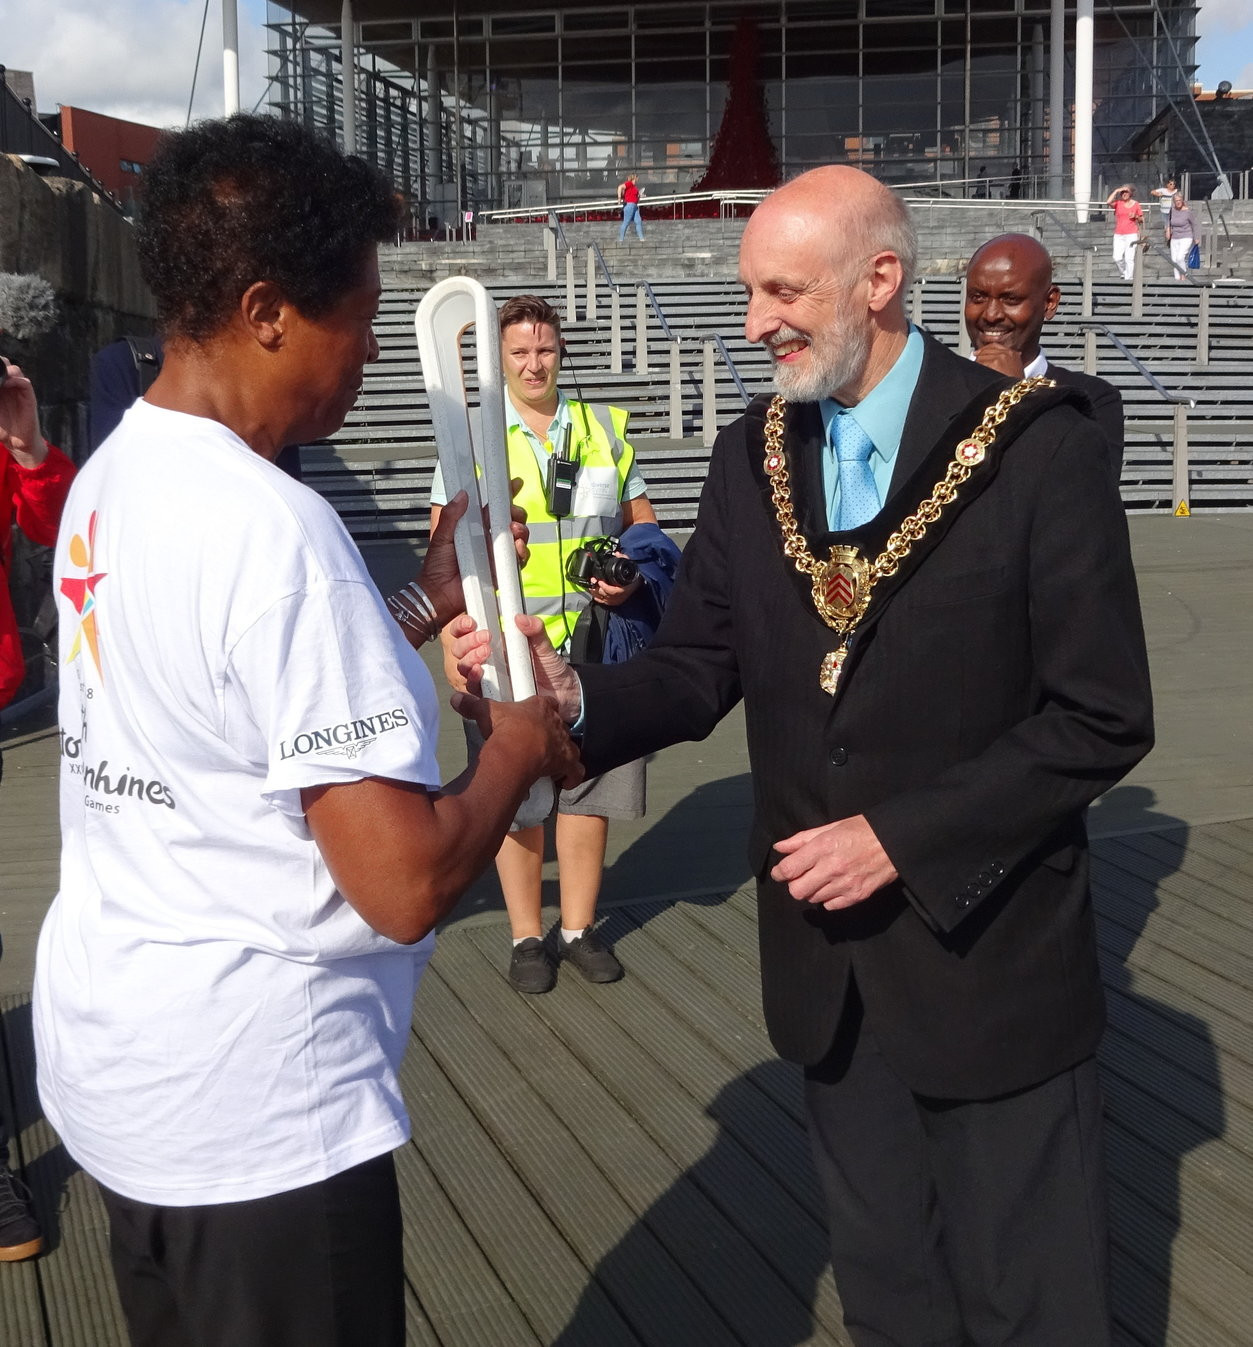 Gaynor Legall shows the baton to the Lord Mayor of Cardiff, Councillor Bob Derbyshire ©Philip Barker